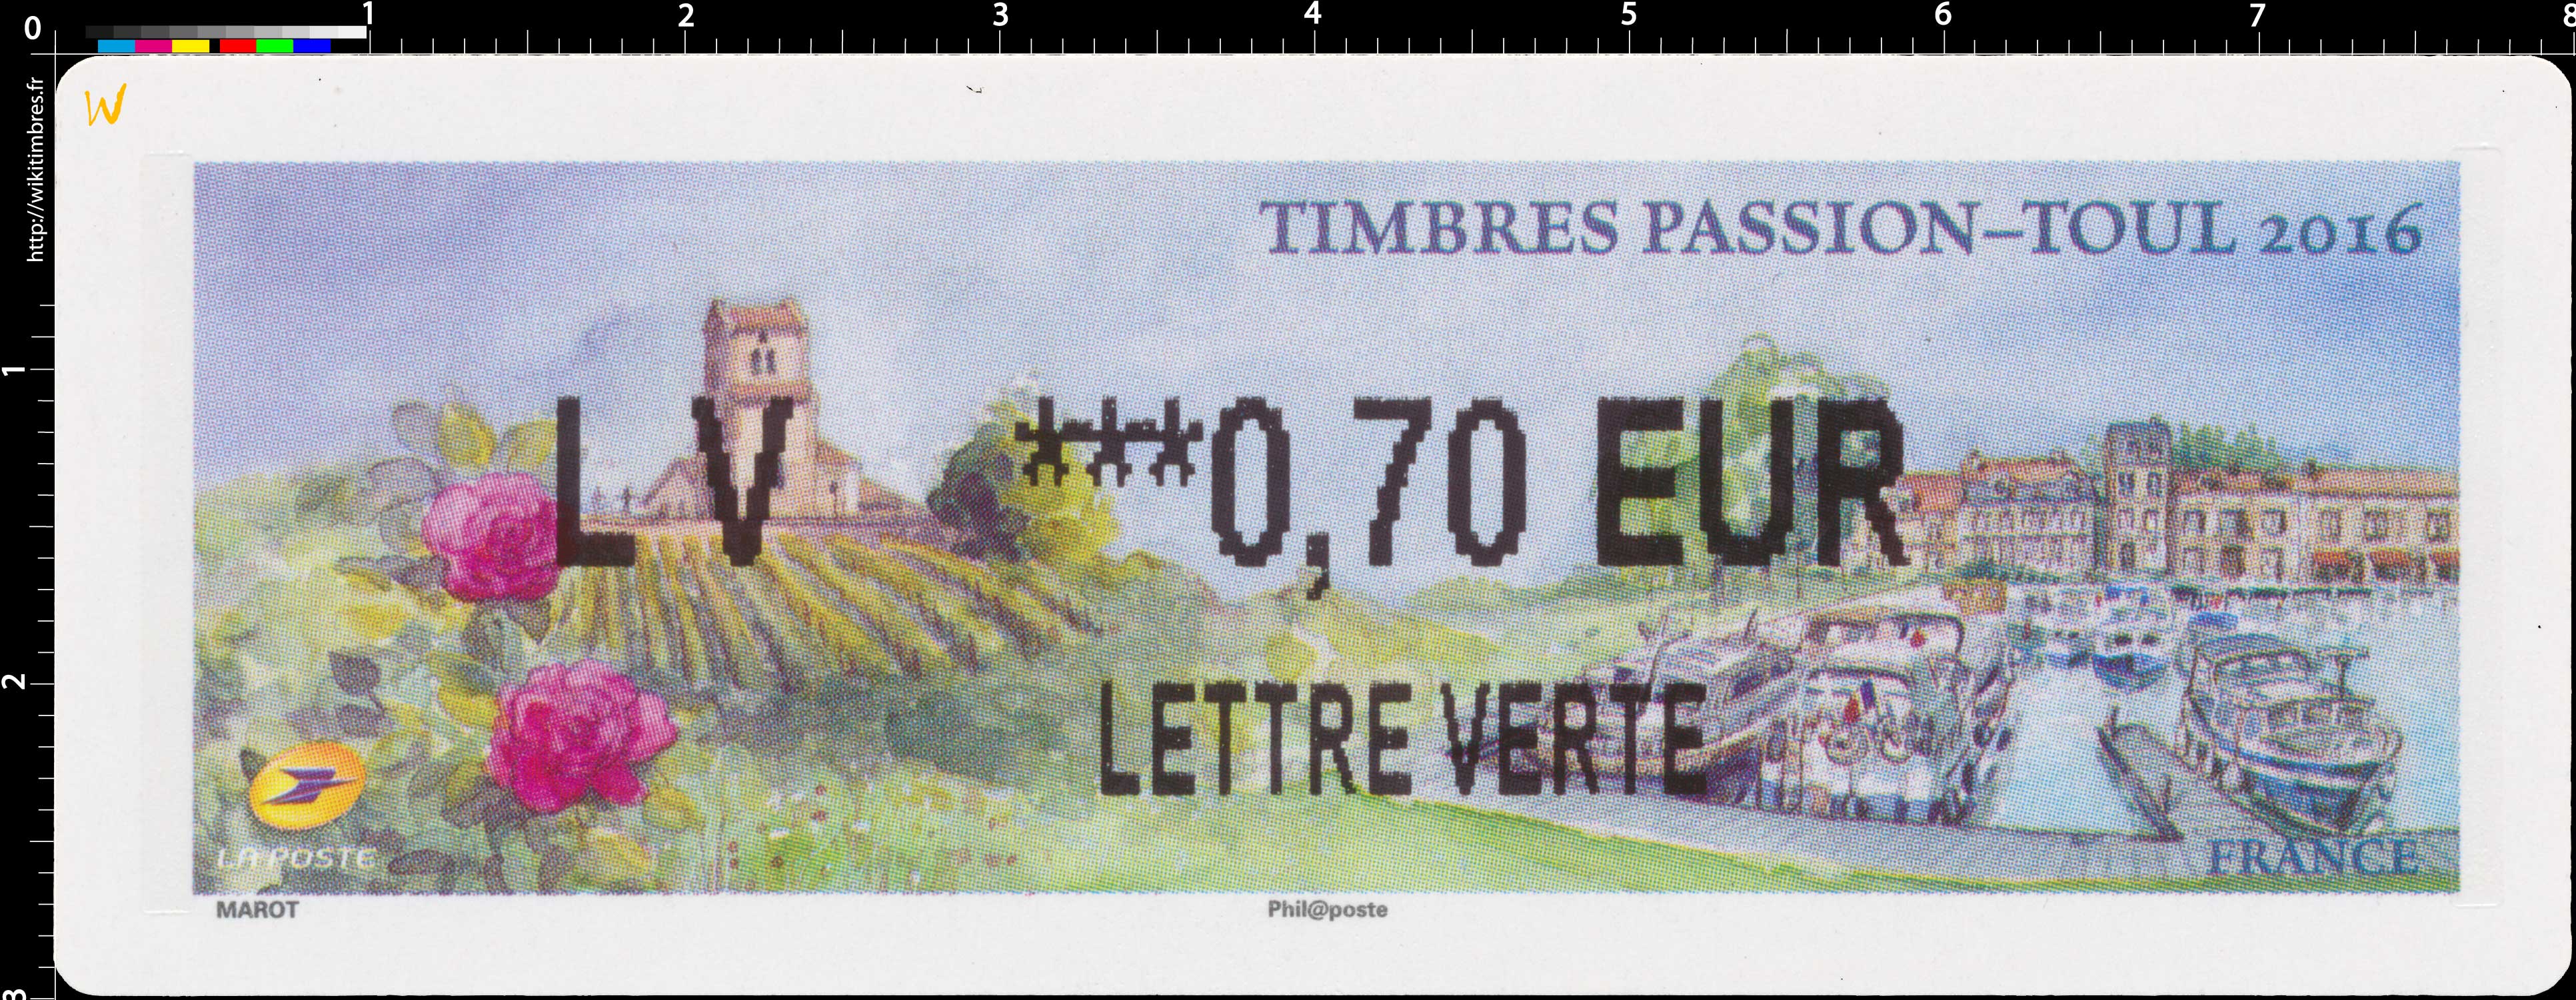 Timbres Passion-Toul 2016